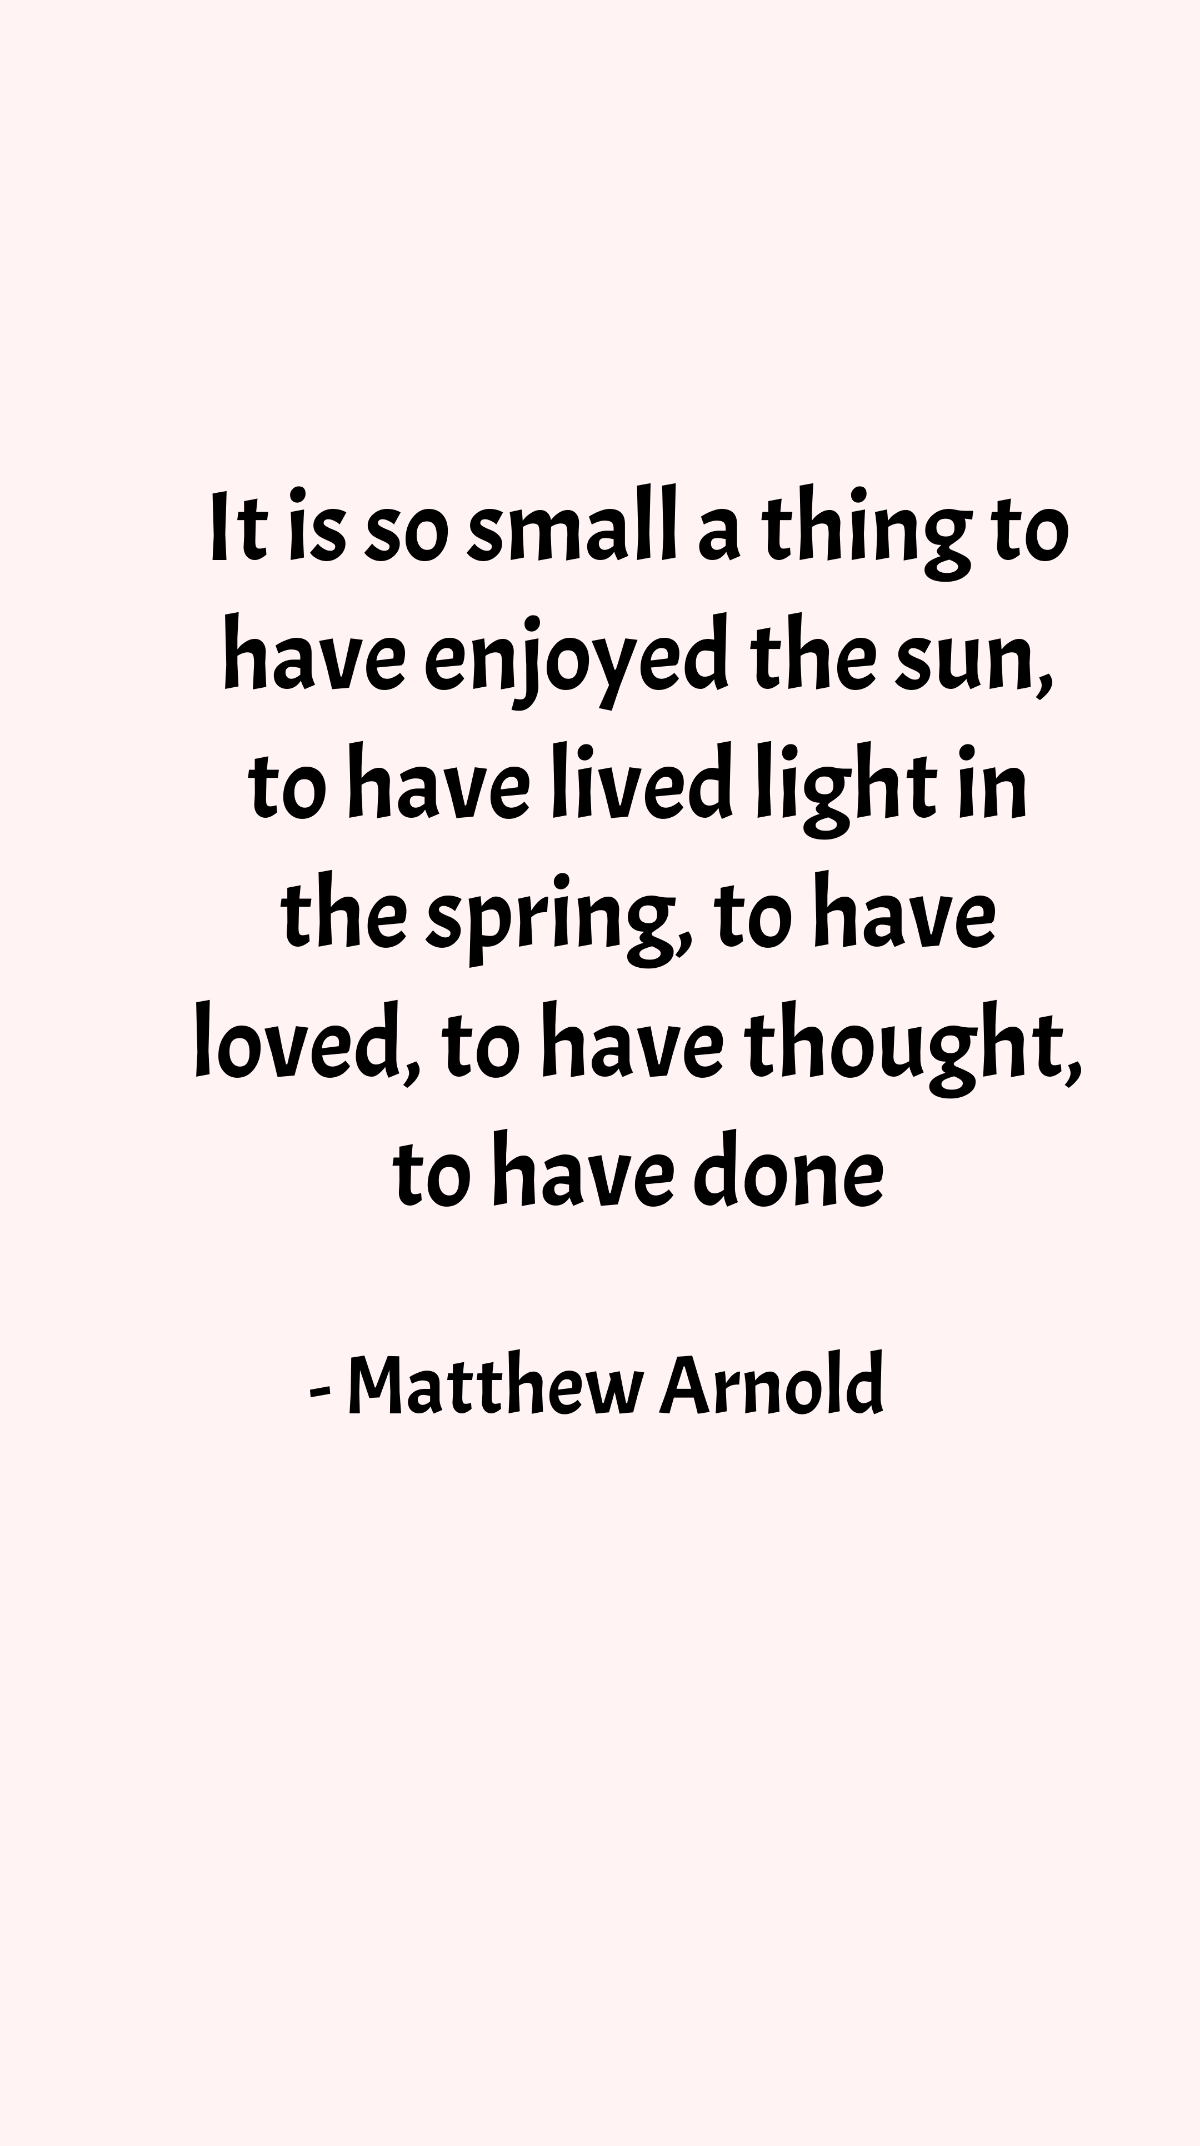 Matthew Arnold - It is so small a thing to have enjoyed the sun, to have lived light in the spring, to have loved, to have thought, to have done Template